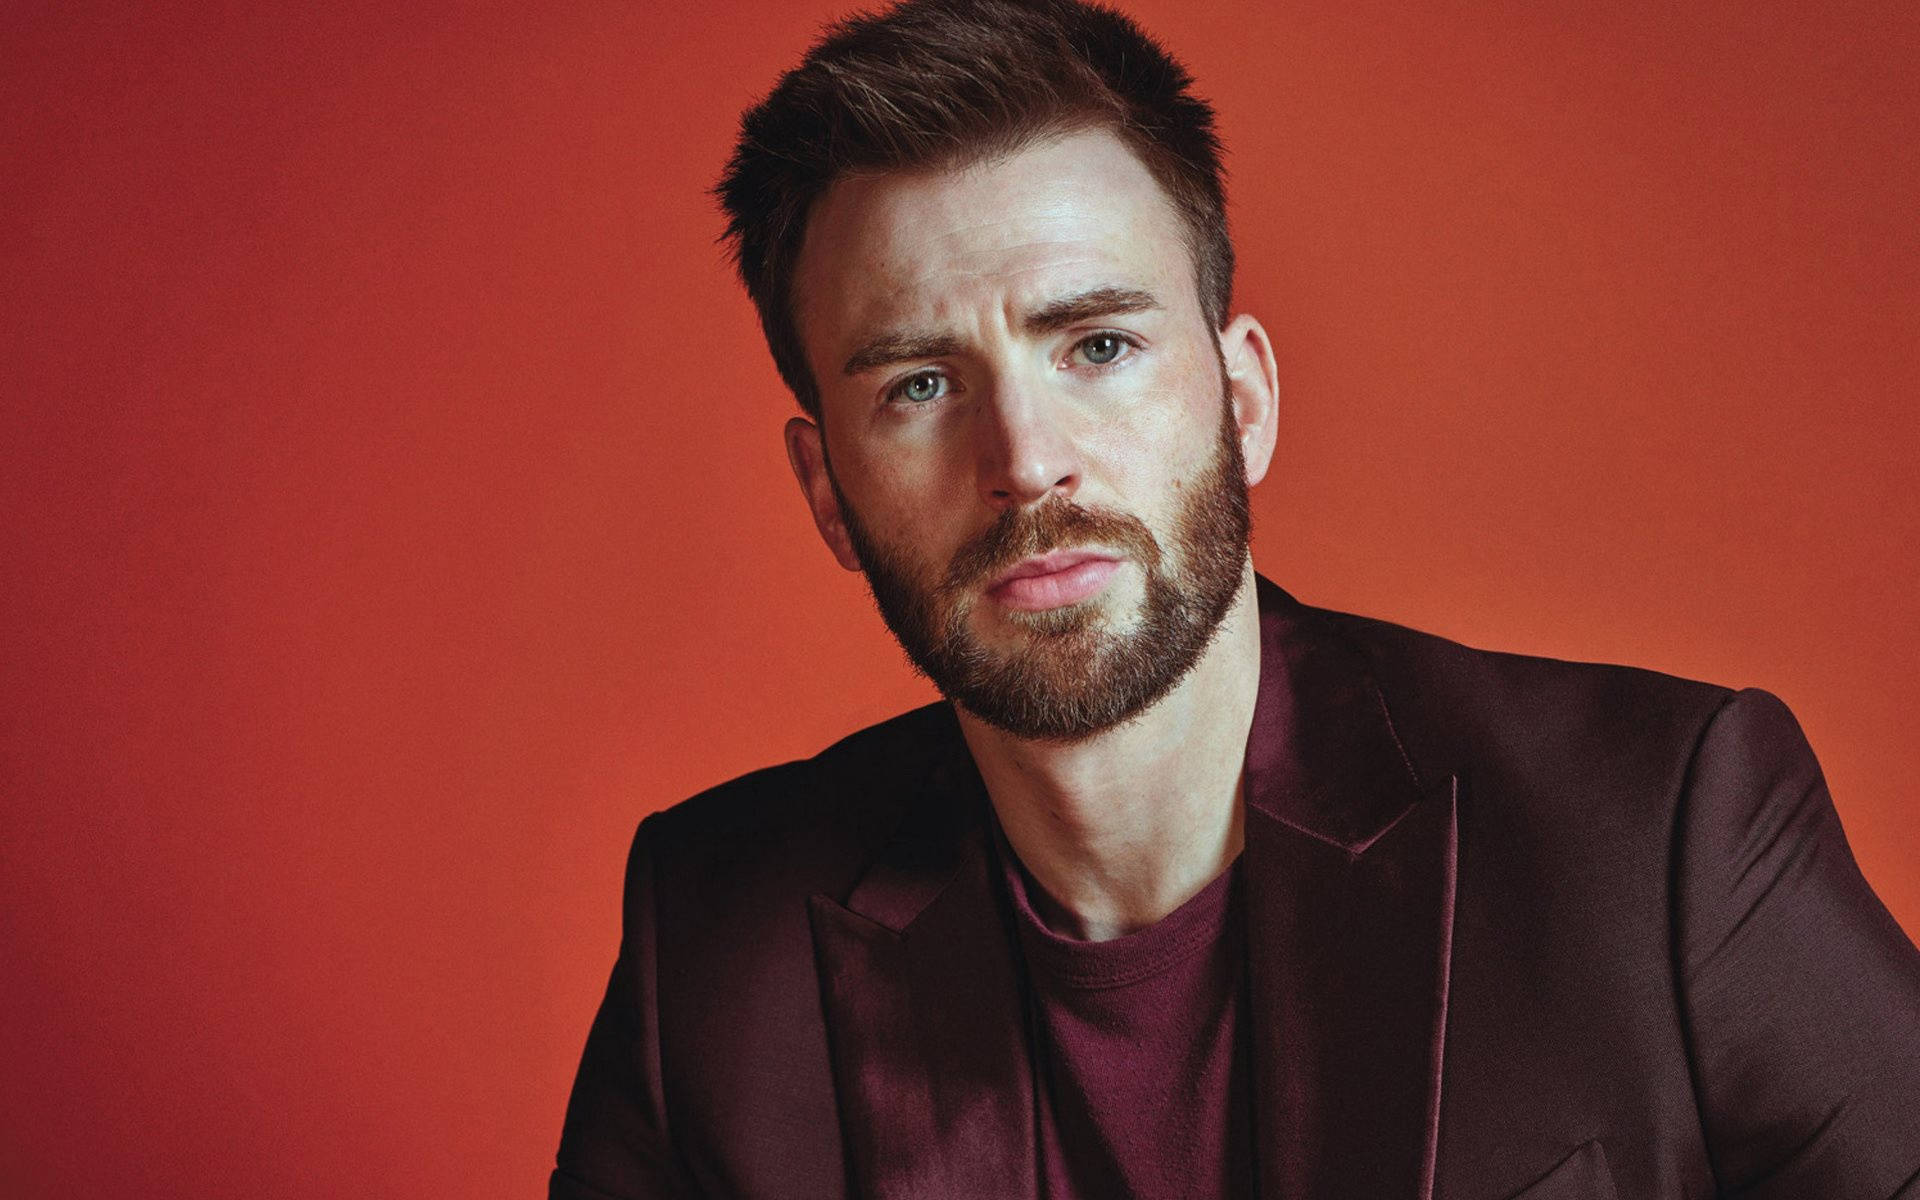 Top 999+ Chris Evans Wallpapers Full HD, 4K✅Free to Use